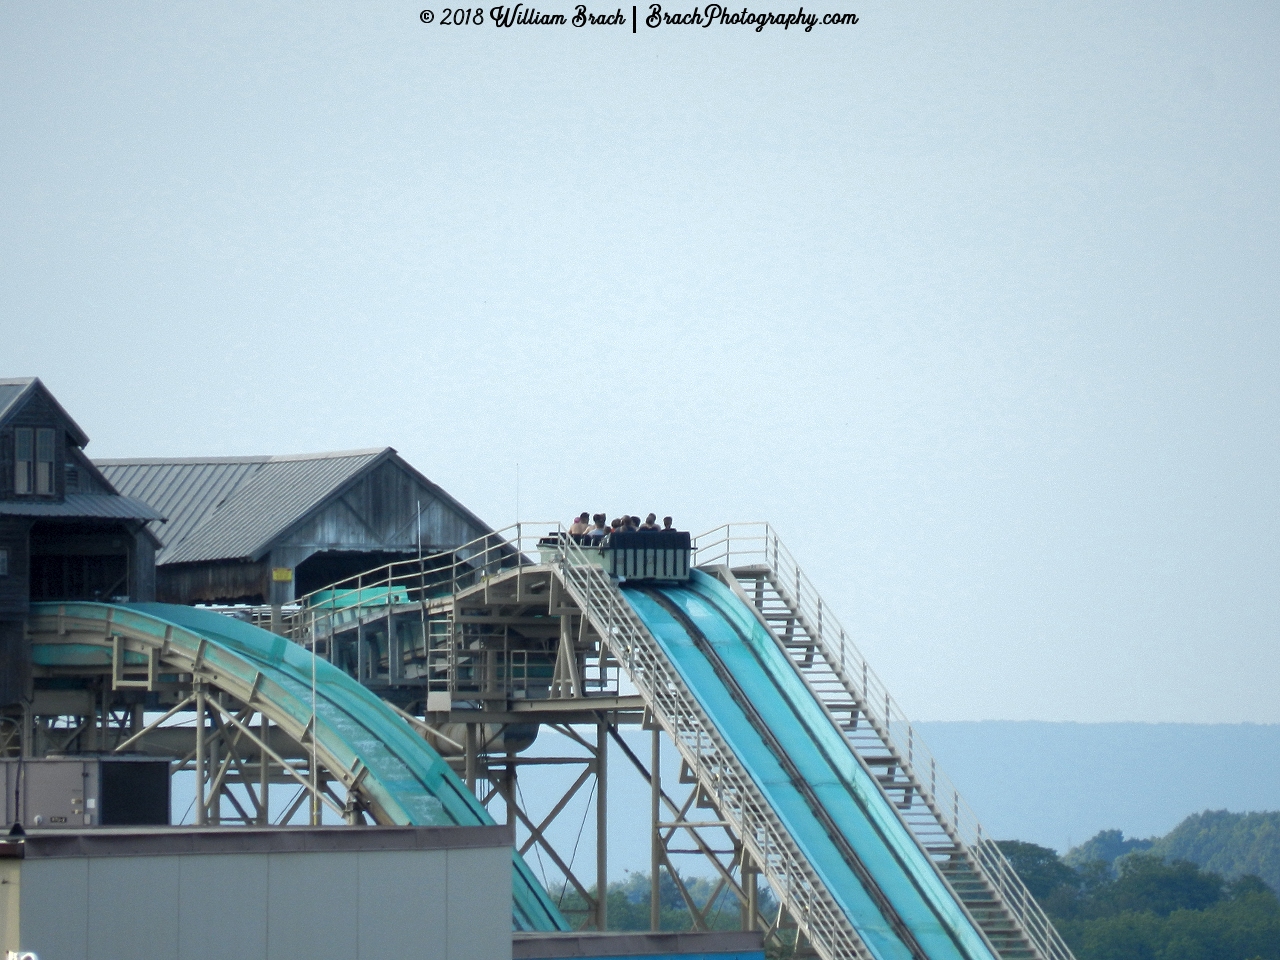 A boat on the White Water Landing spill water ride cresting the top of the lift hill.